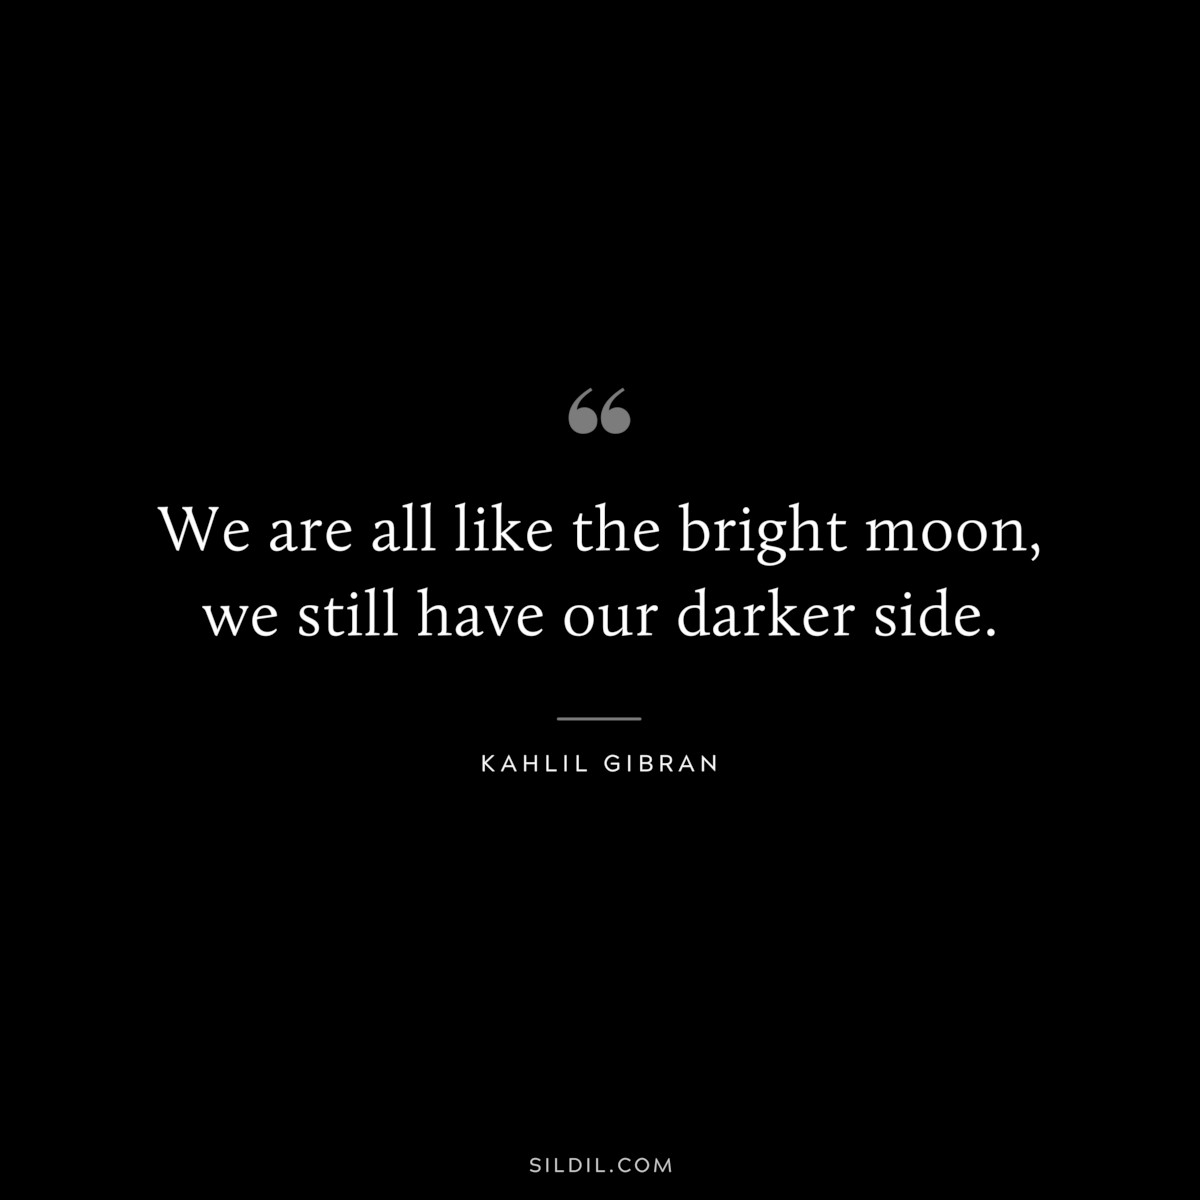 We are all like the bright moon, we still have our darker side. ― Kahlil Gibran